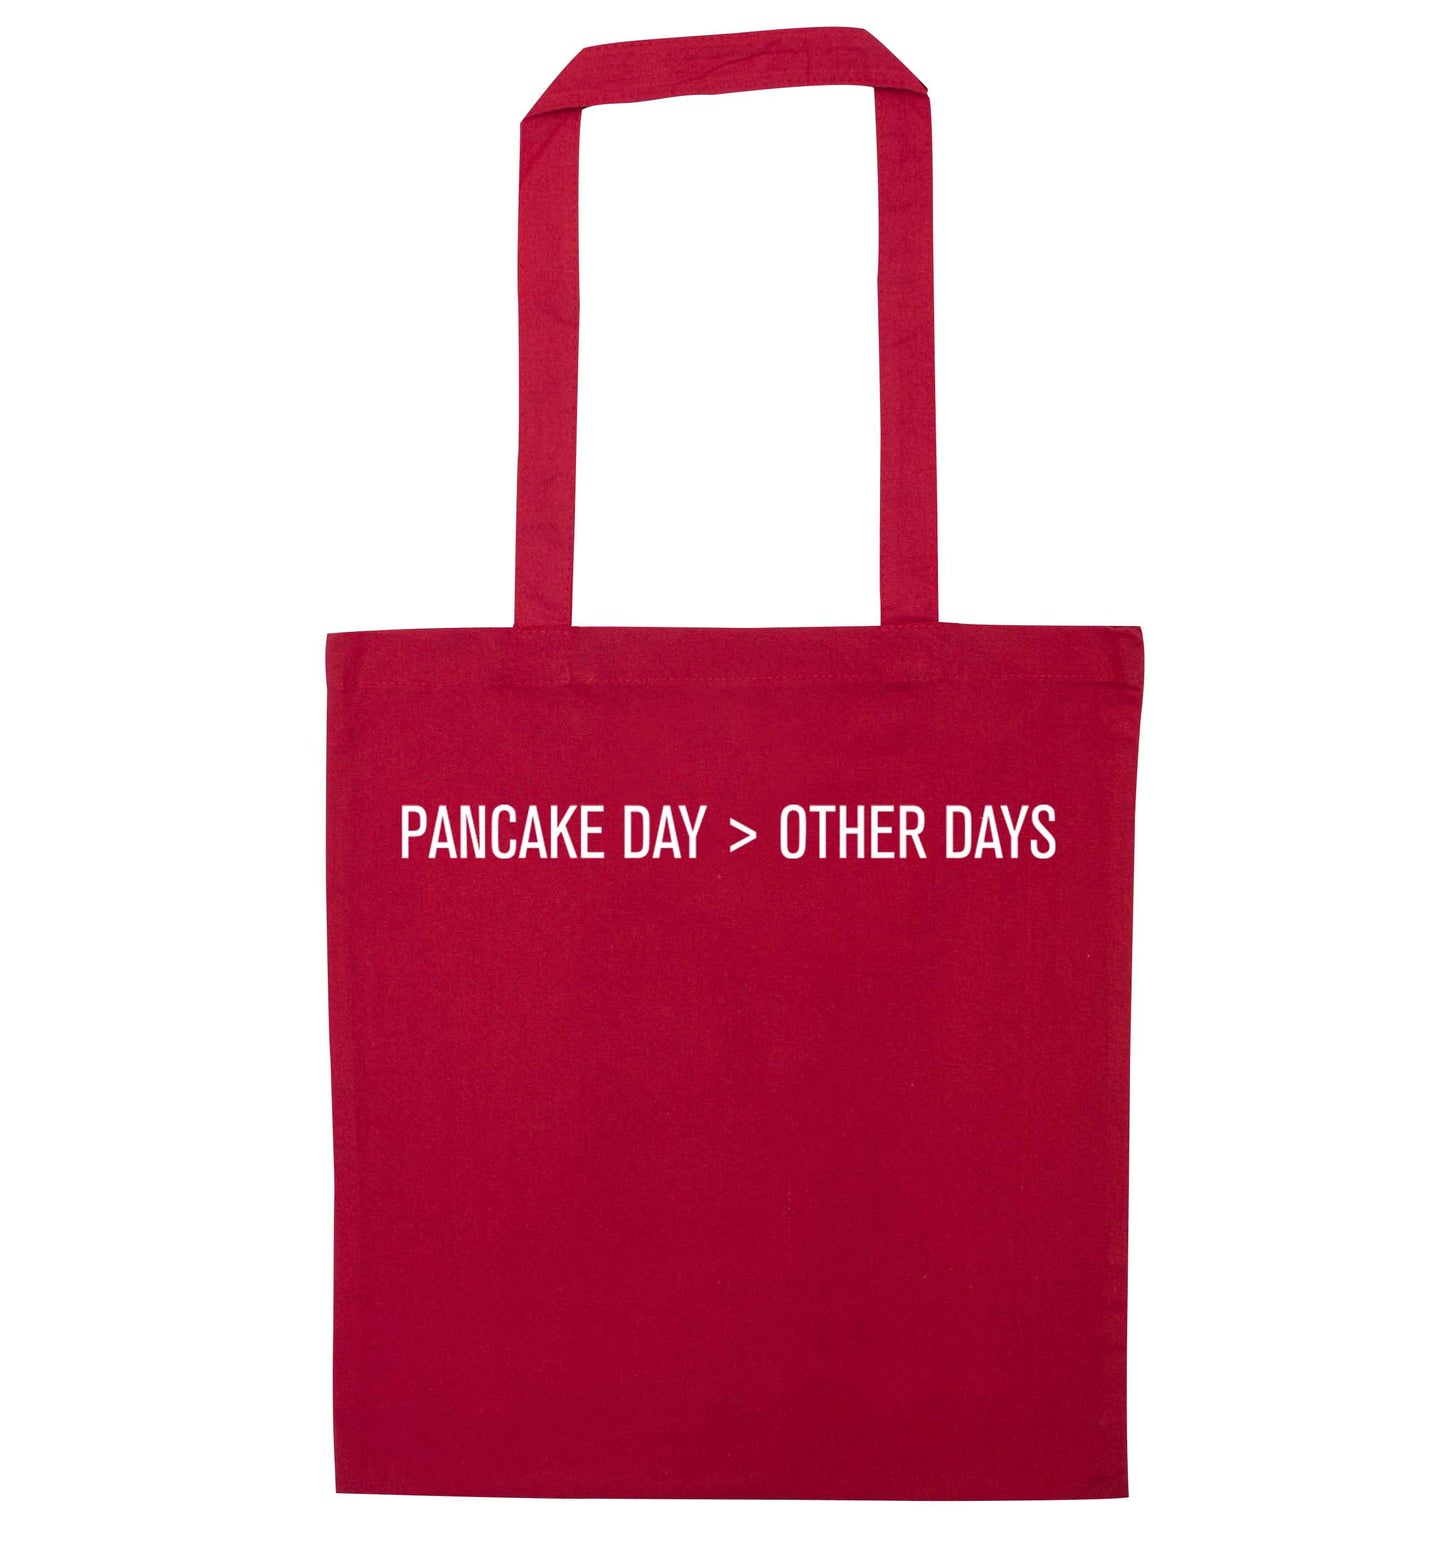 Pancake day > other days red tote bag